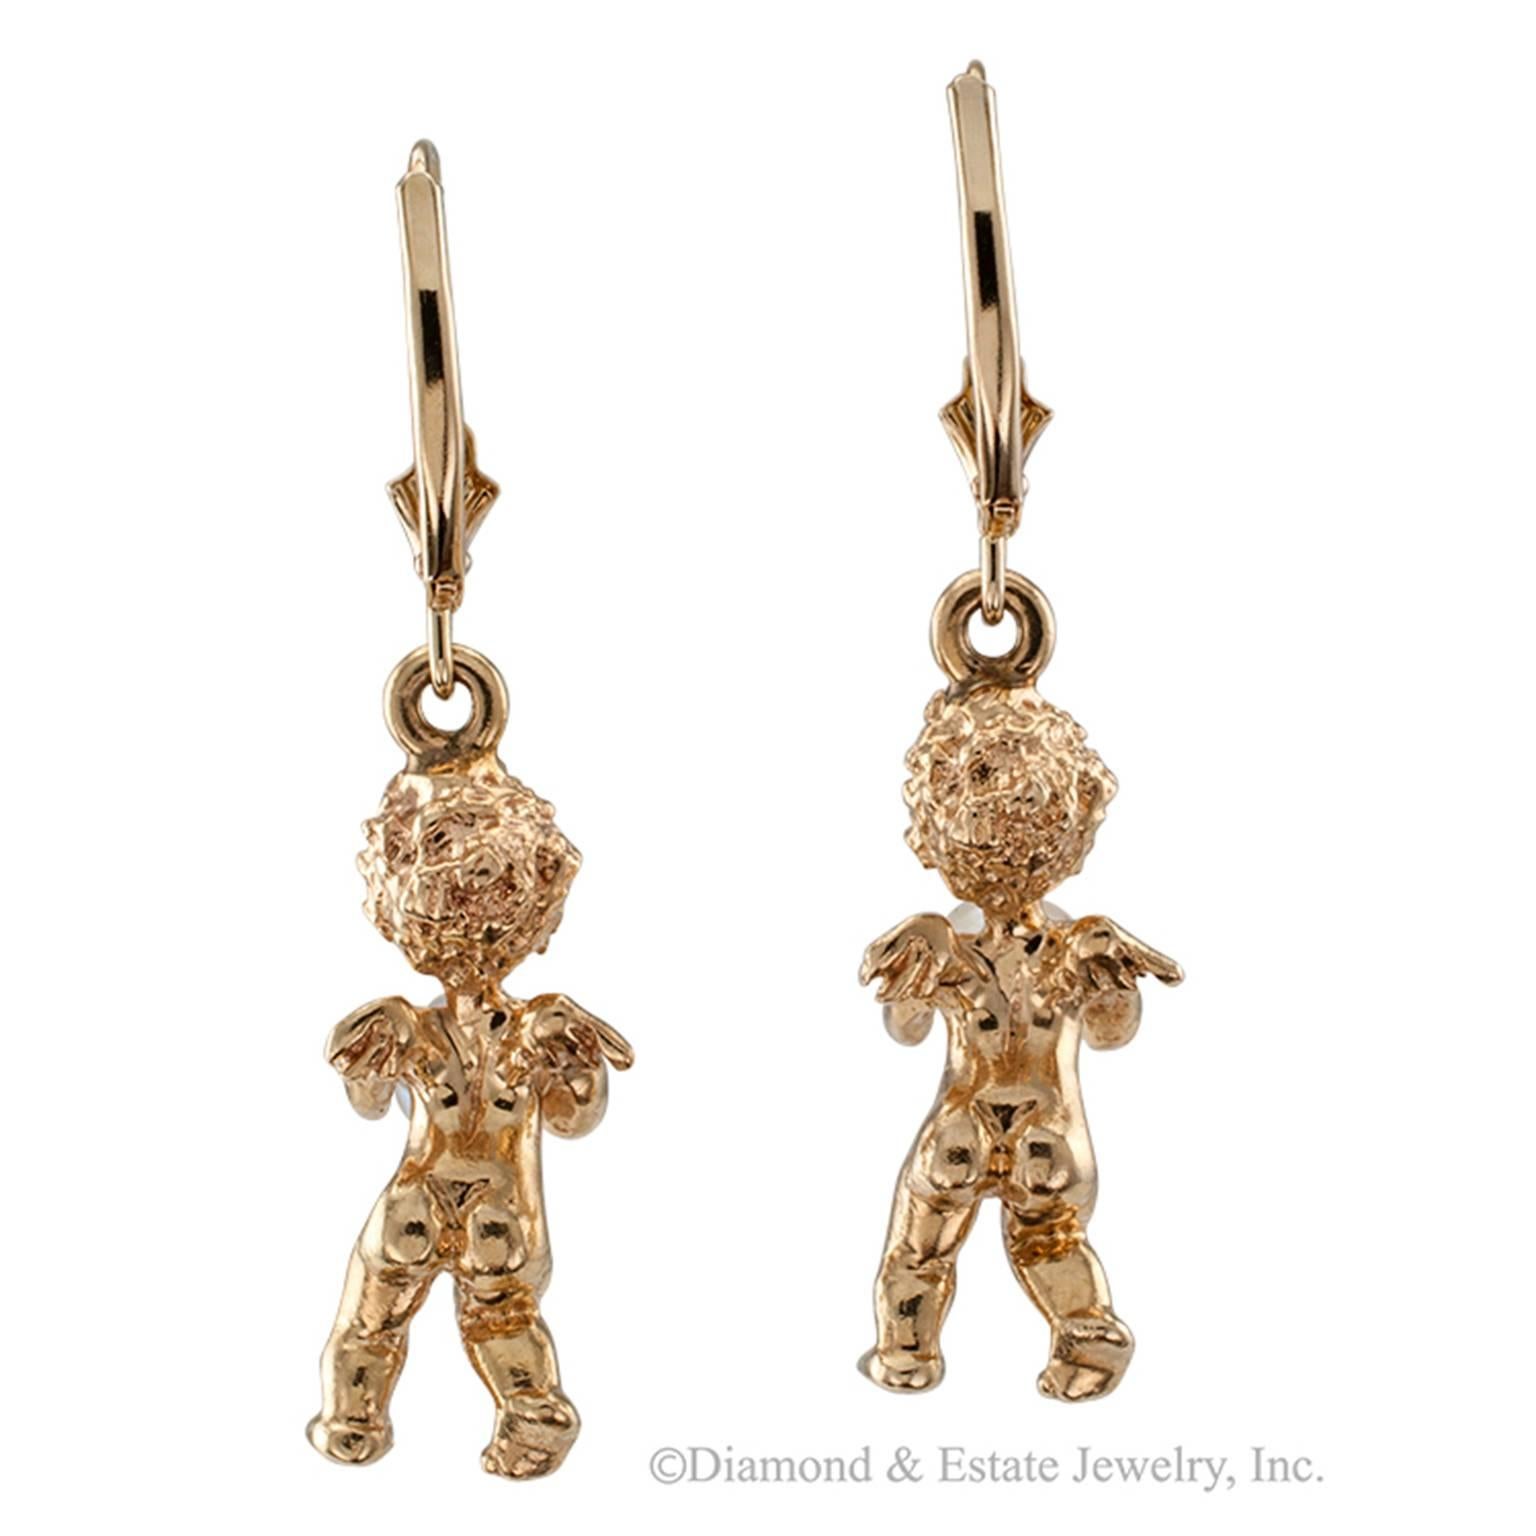 Attributed to Ruser Gold and Cultured Pearl Cherub Earrings

Cultured pearl sapphire and 14-karat gold cherub drop earrings circa 1950, attributed to Ruser.  These charming little angels give the impression of holding the whole world in the form